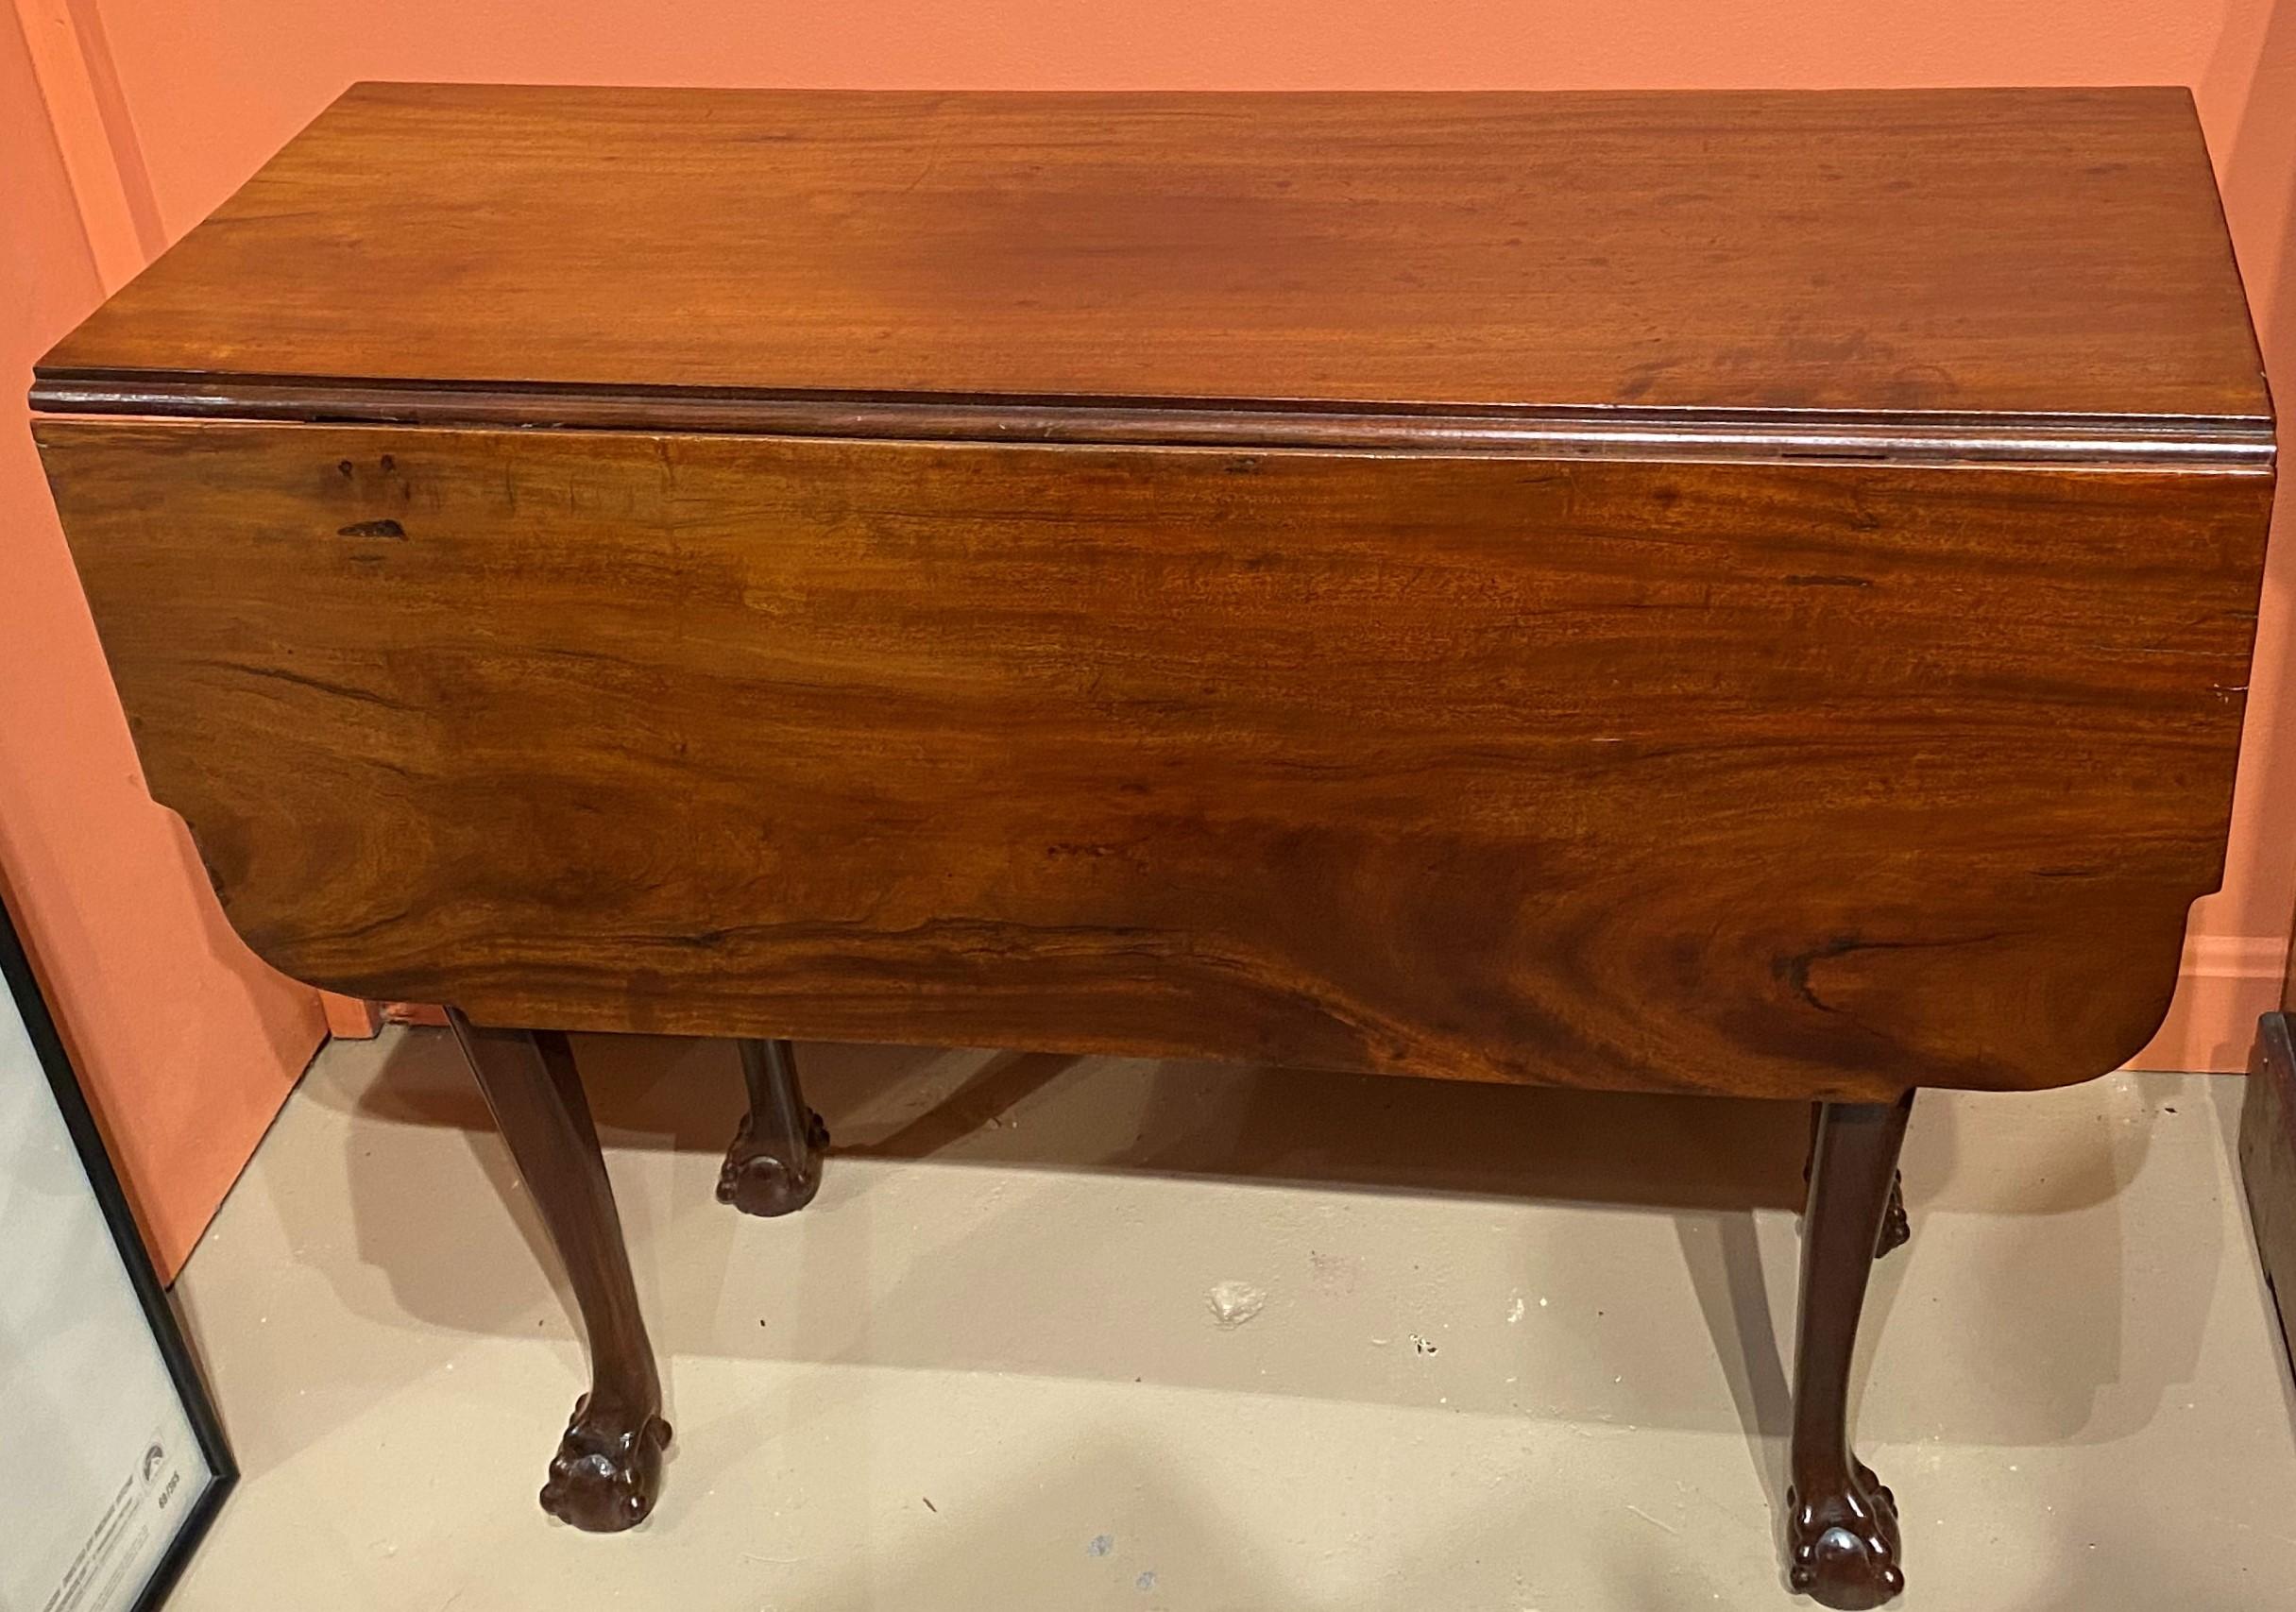 A fine form mahogany rectangular drop leaf table with chestnut & pine secondary woods, astragal corners on the table top, swing out cabriole legs on each side, terminating with nicely carved ball and claw feet. Massachusetts in origin, dating to the